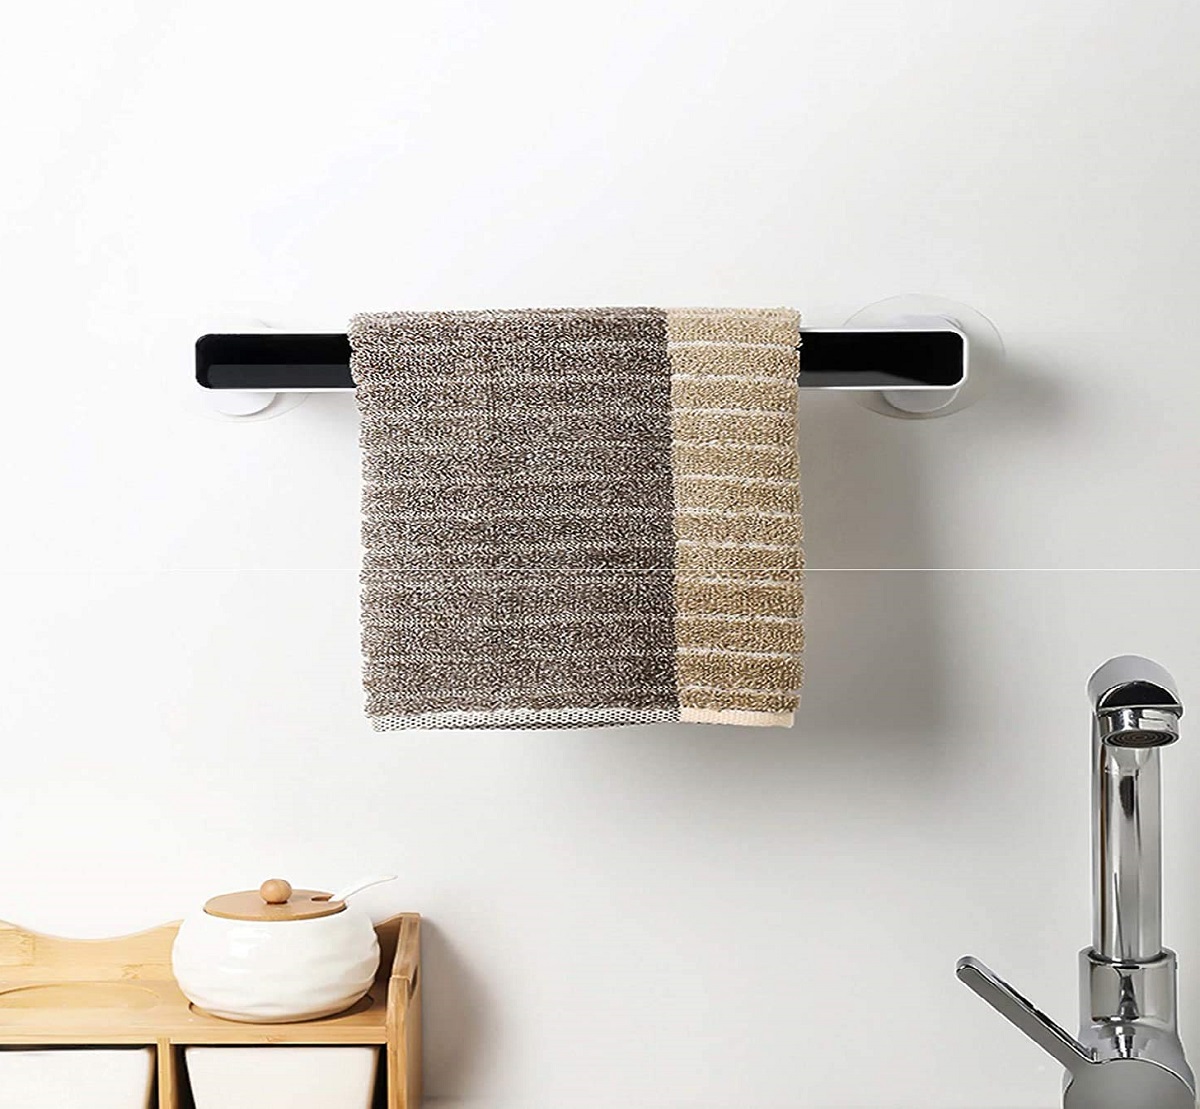 How To Replace Plastic Towel Bar